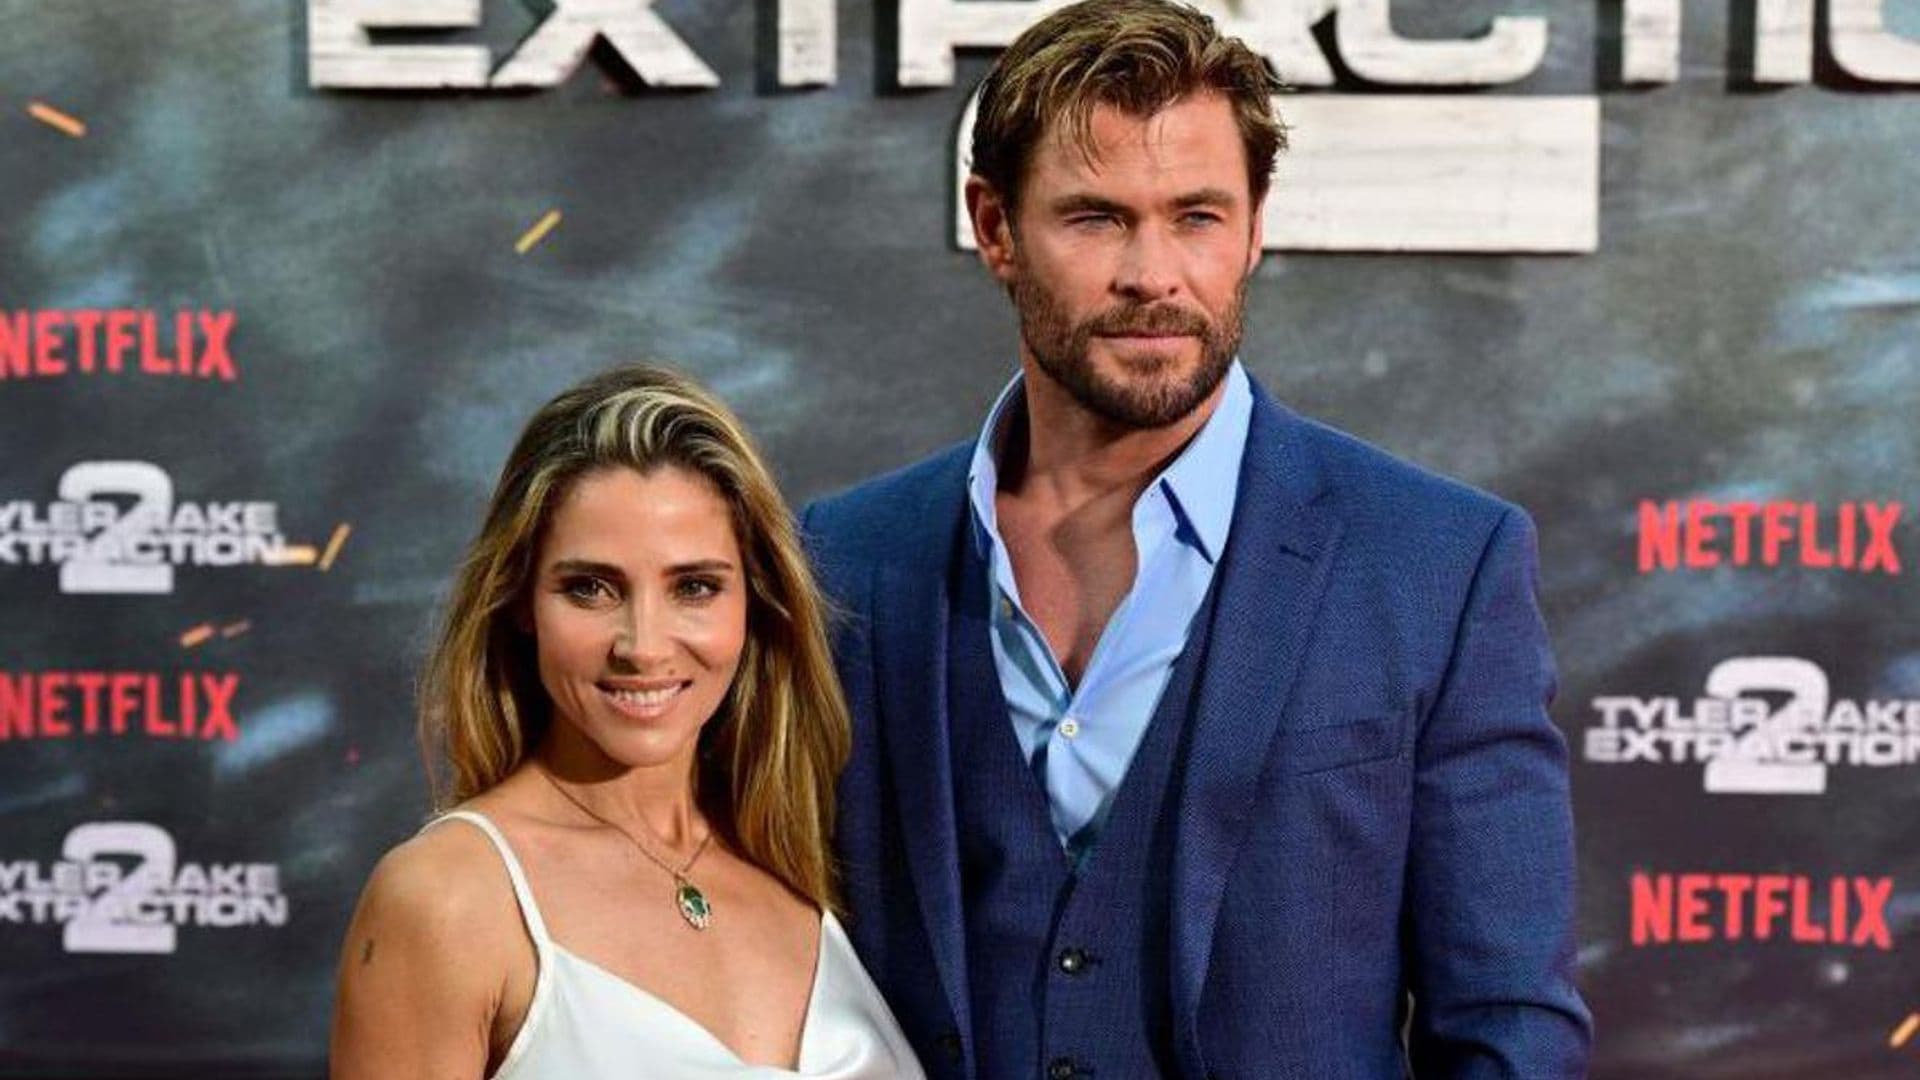 Elsa Pataky and Chris Hemsworth kick off the new year in the snow